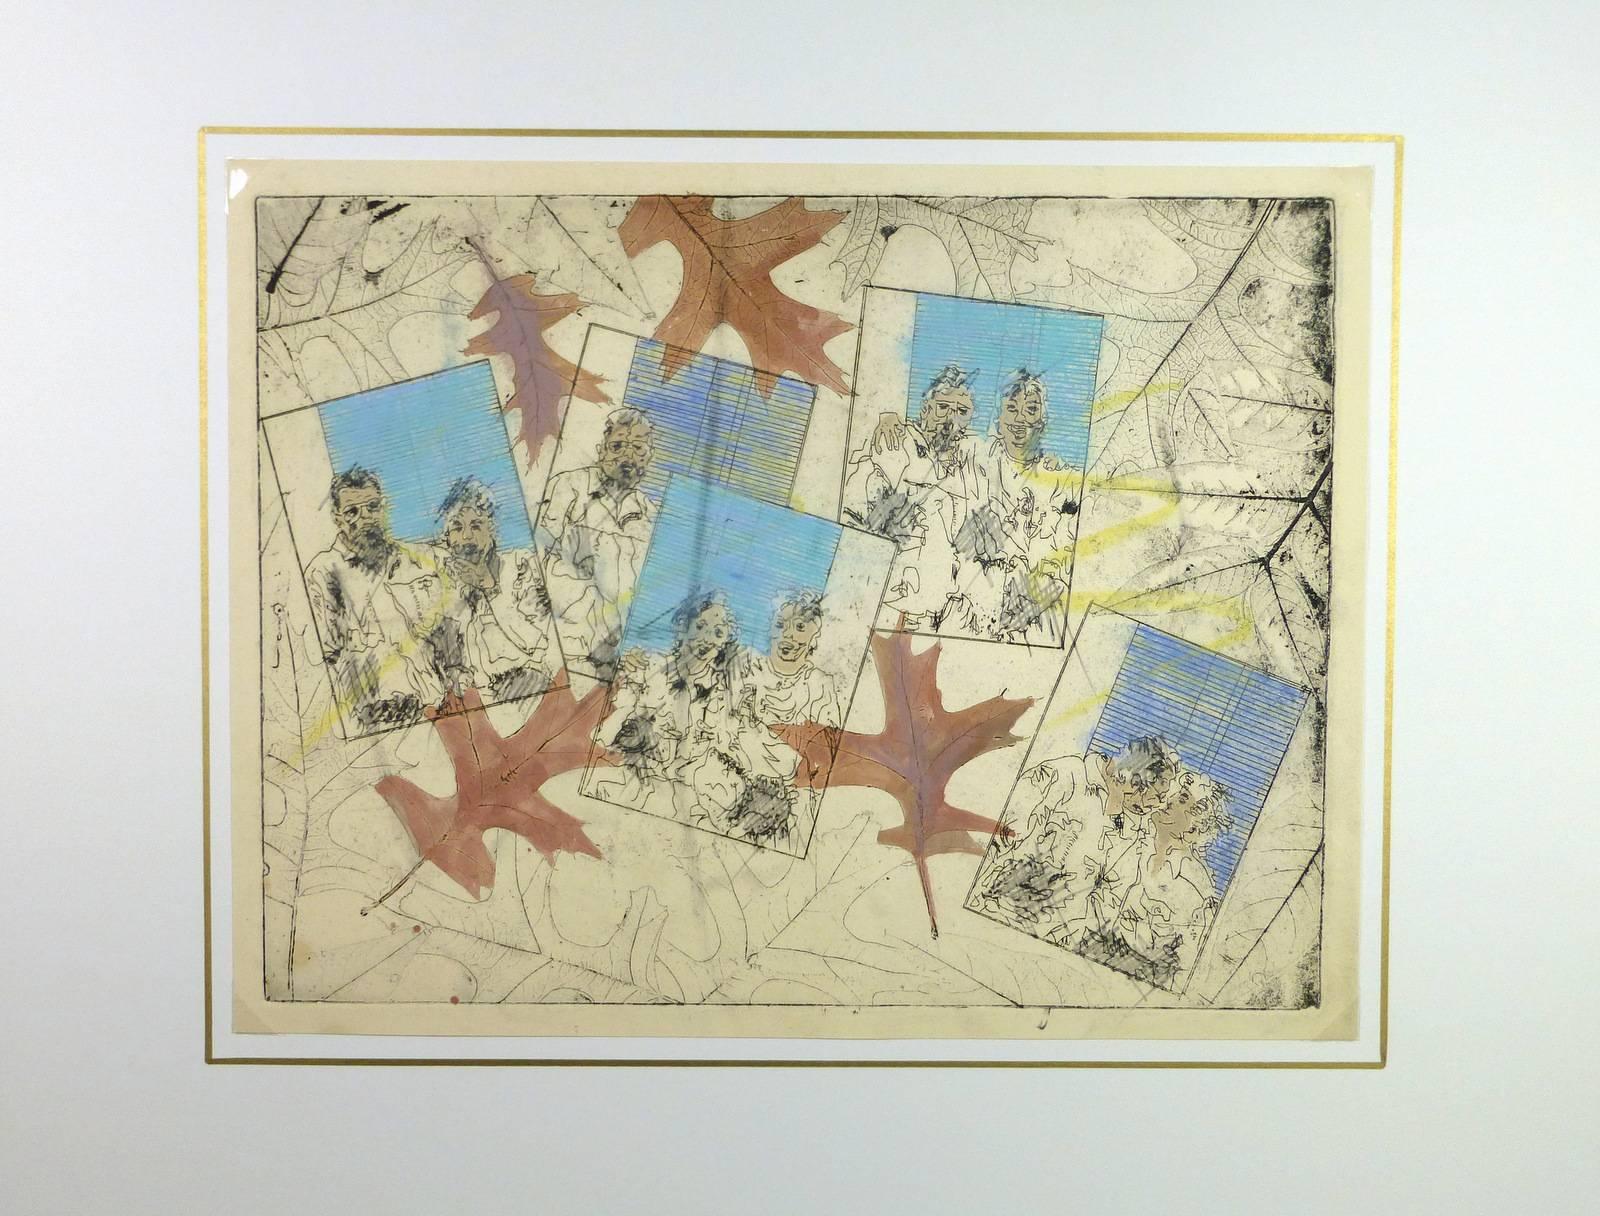 Beautiful monotype of various couples sketches with background of leaves by American artist Kismine Varner, 1990.   

Original artwork on paper displayed on a white mat with a gold border. Mat fits a standard-size frame.  Archival plastic sleeve and